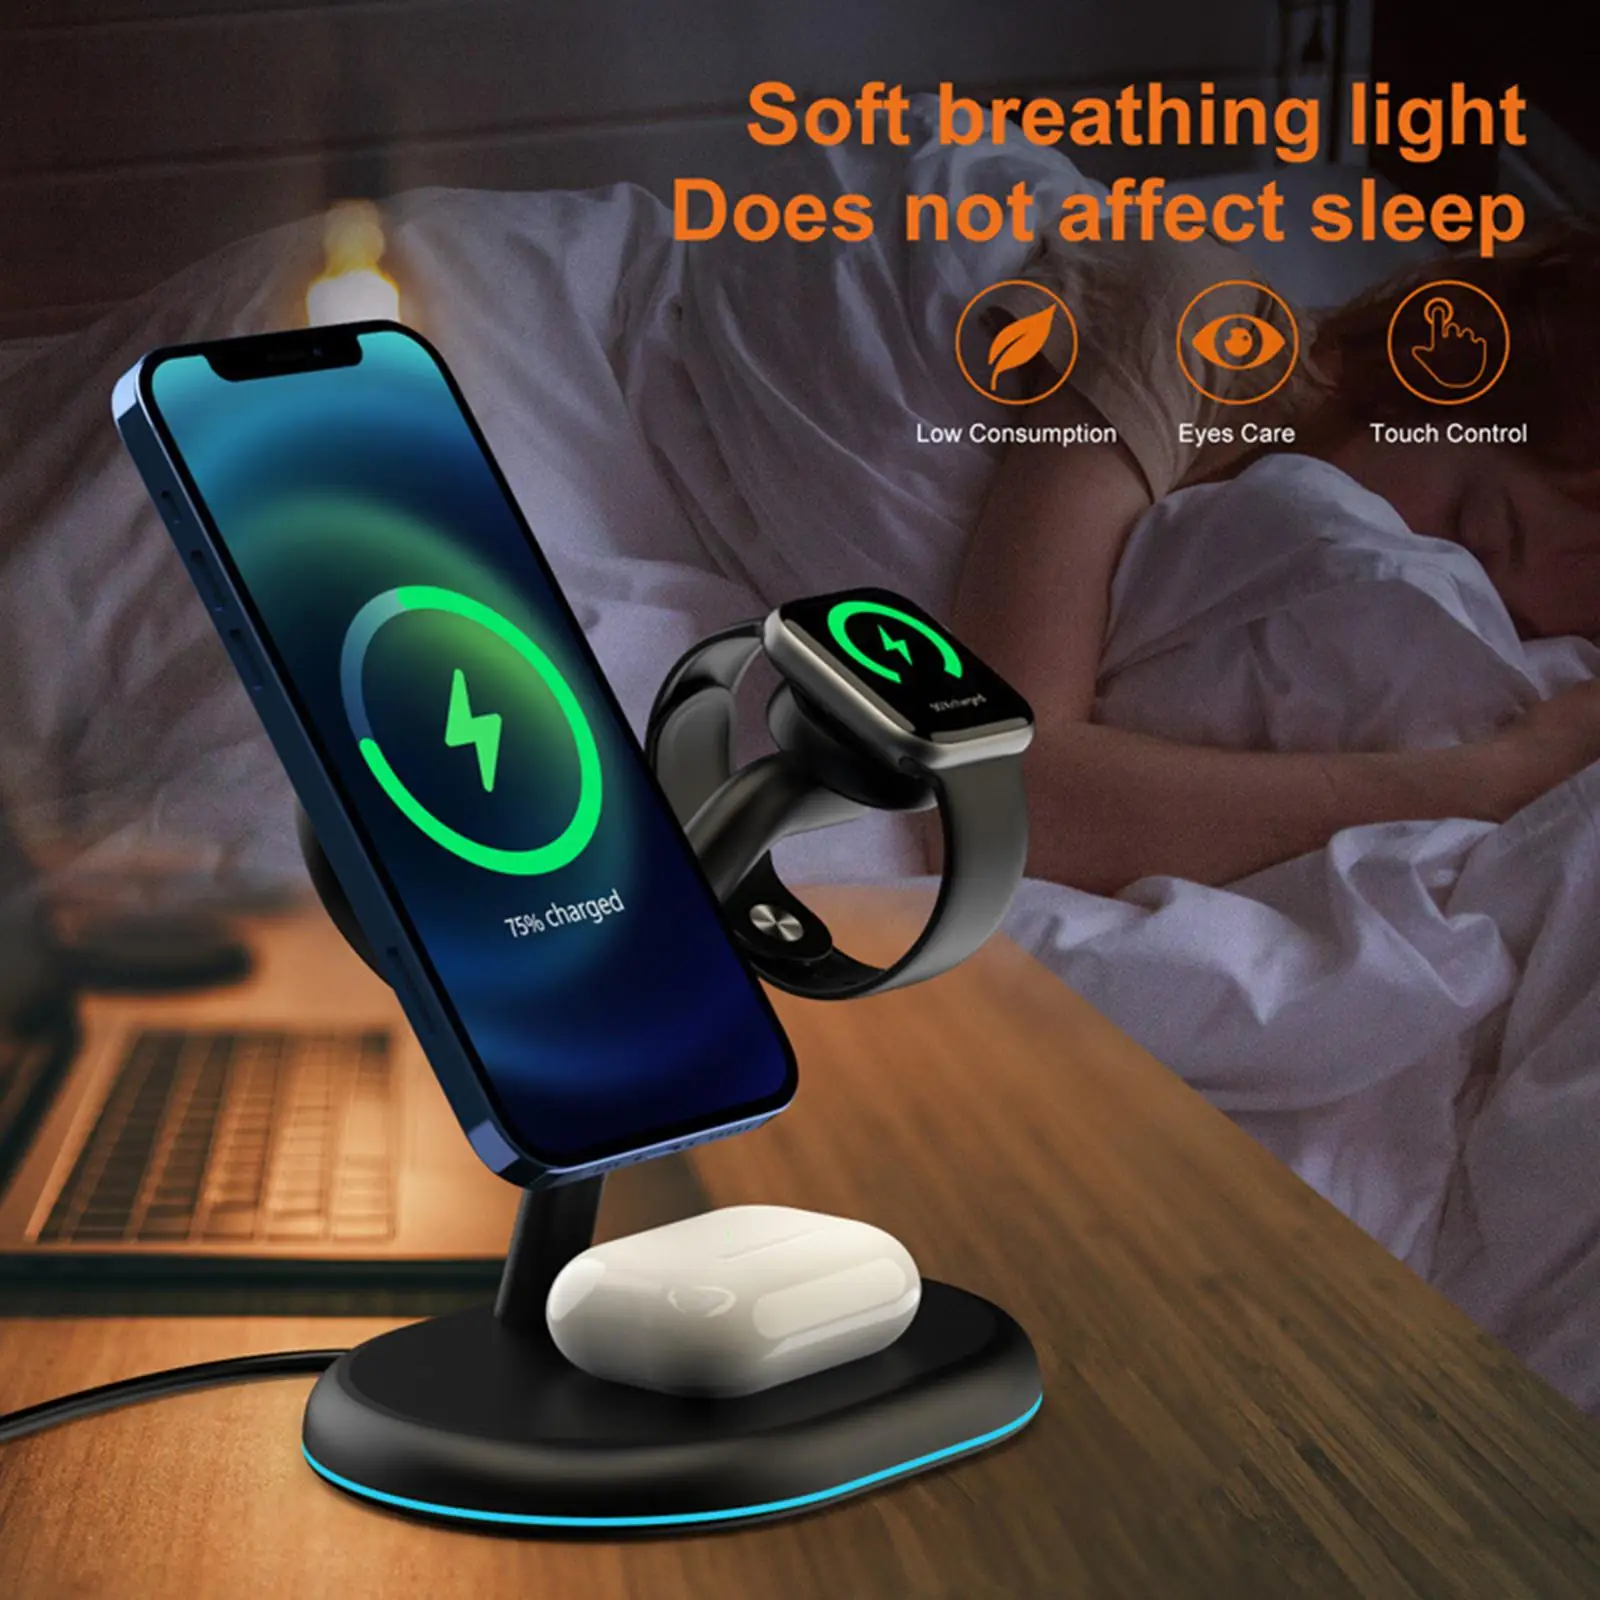 1 Piece 15W Bracket USB C Port ABS Charging Station Magnetic Wireless Charger 3 in 1 for Phone Watch Earphone Office Table Home